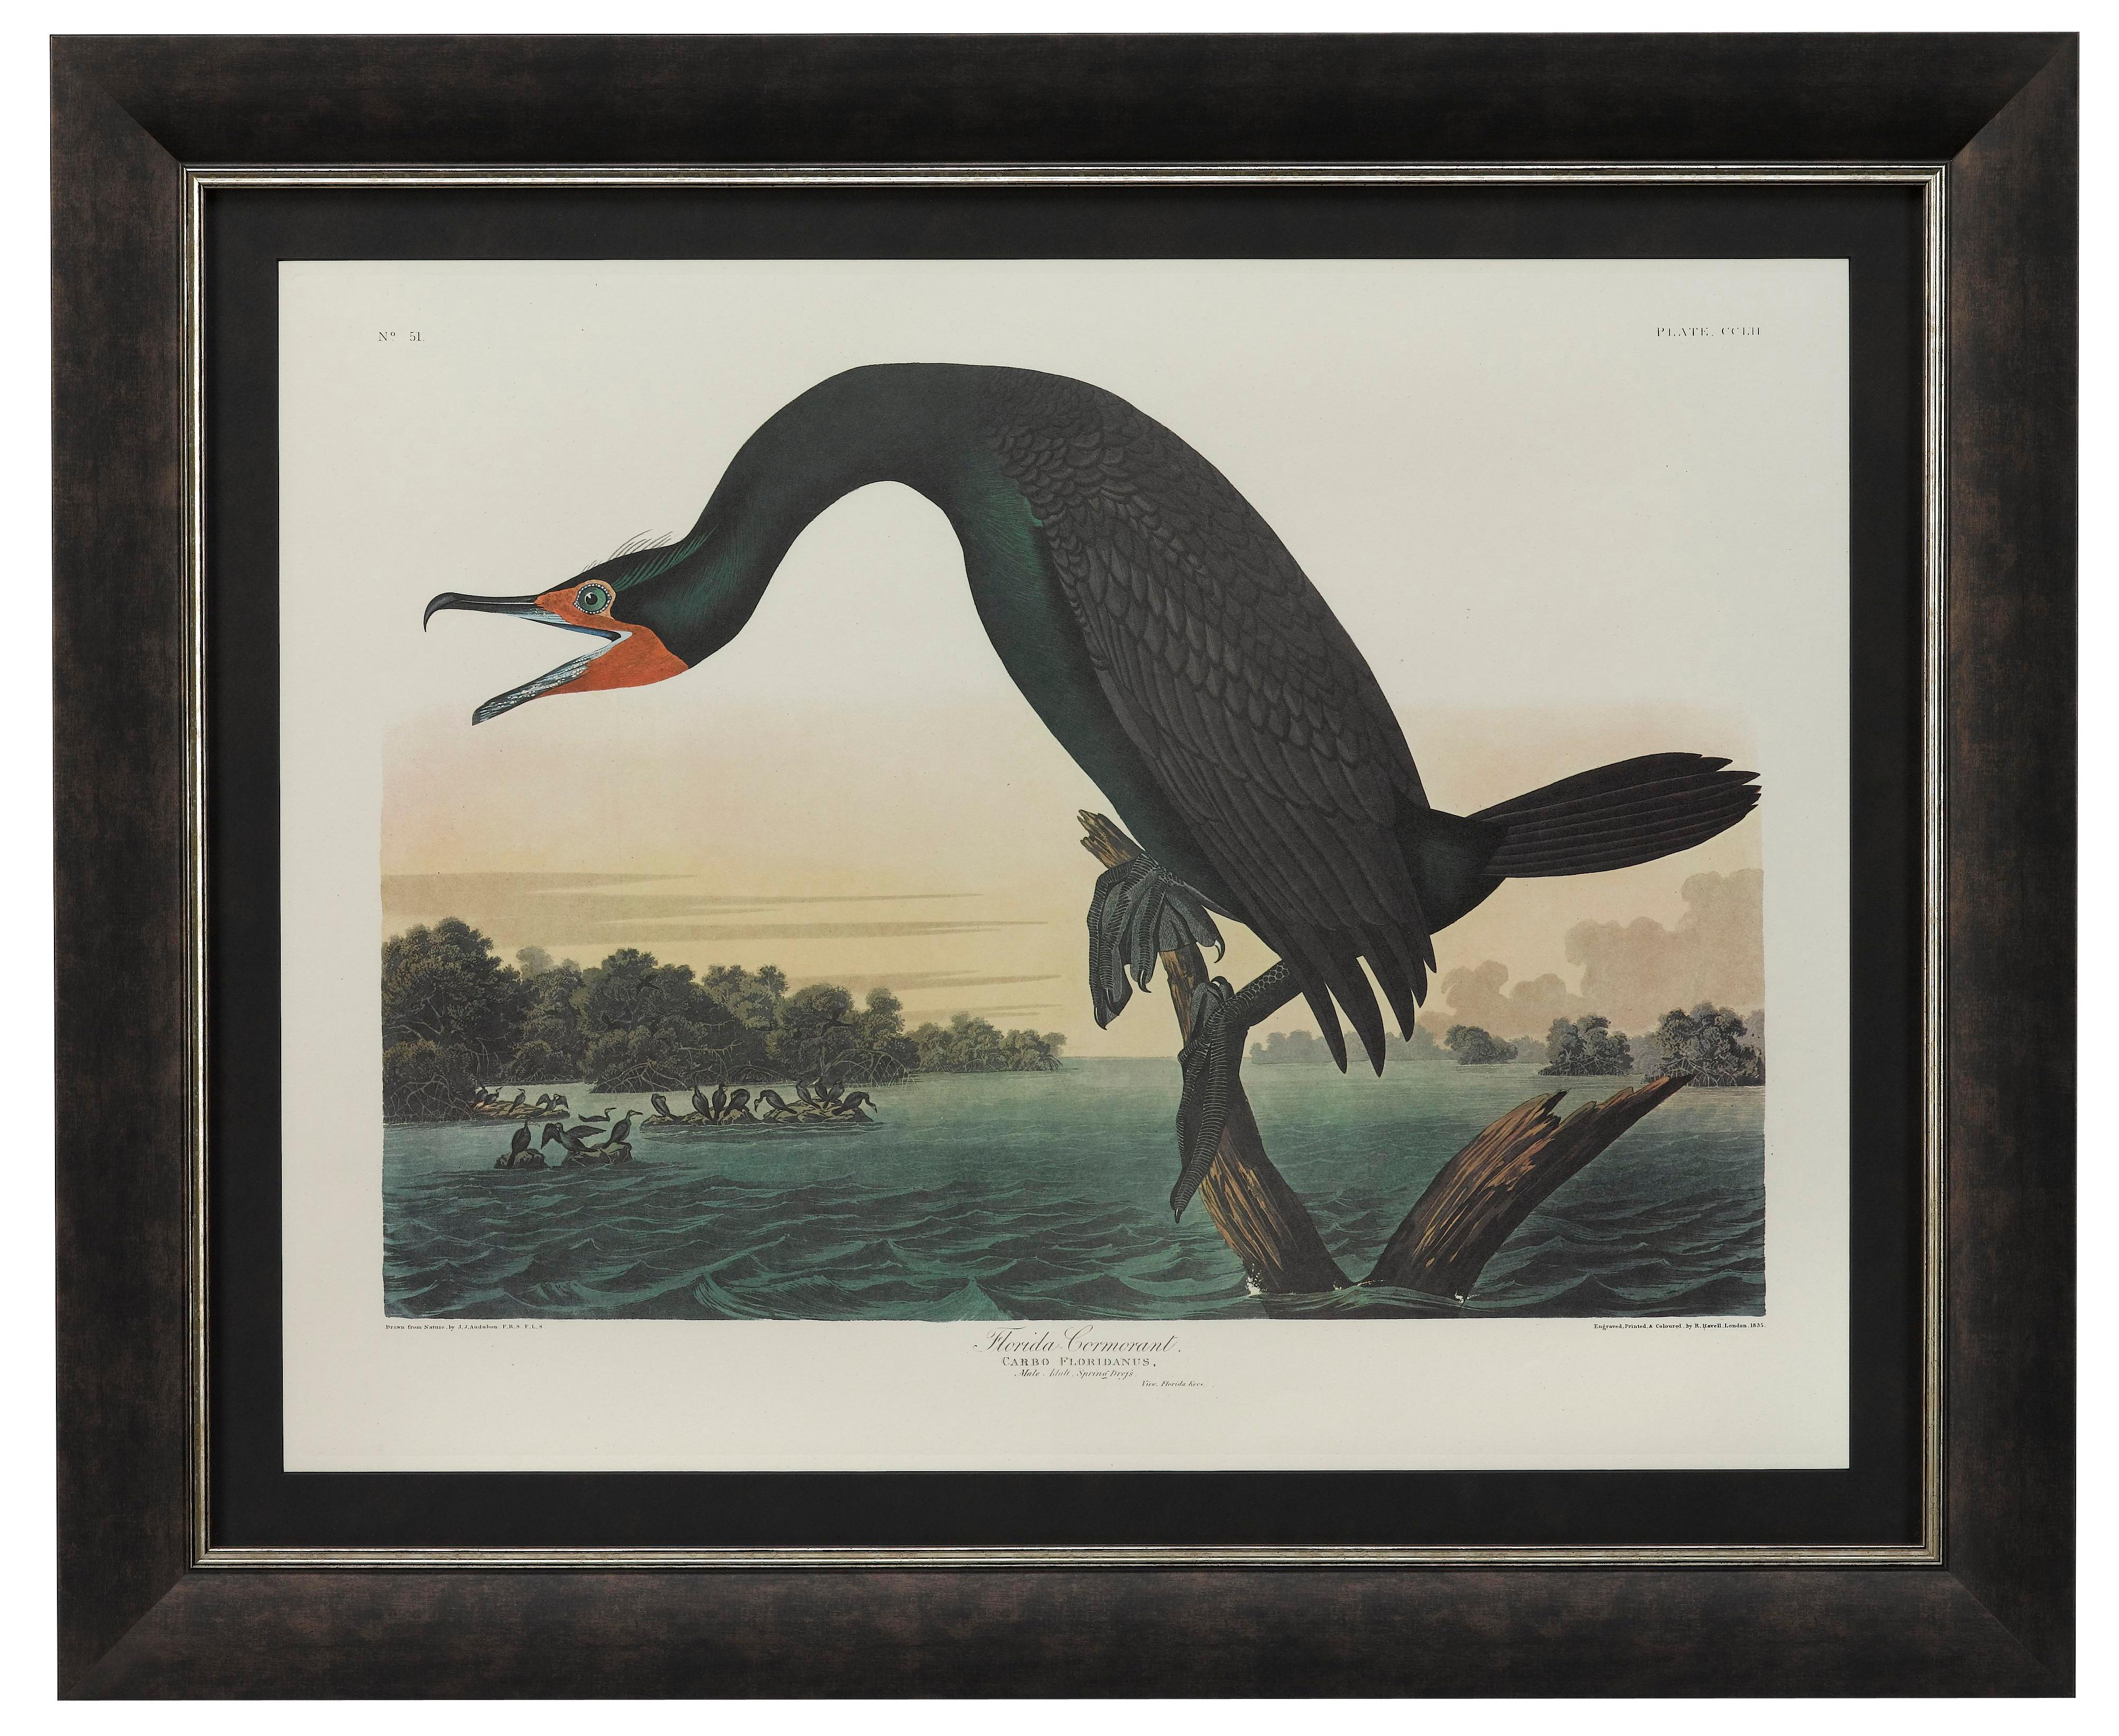 This is a stunning color lithograph of the “Florida Cormorant”, Plate 252 from the 1971-1972 “Amsterdam Audubon” edition of James John Audubon’s epic ornithological masterpiece, “The Birds of America.